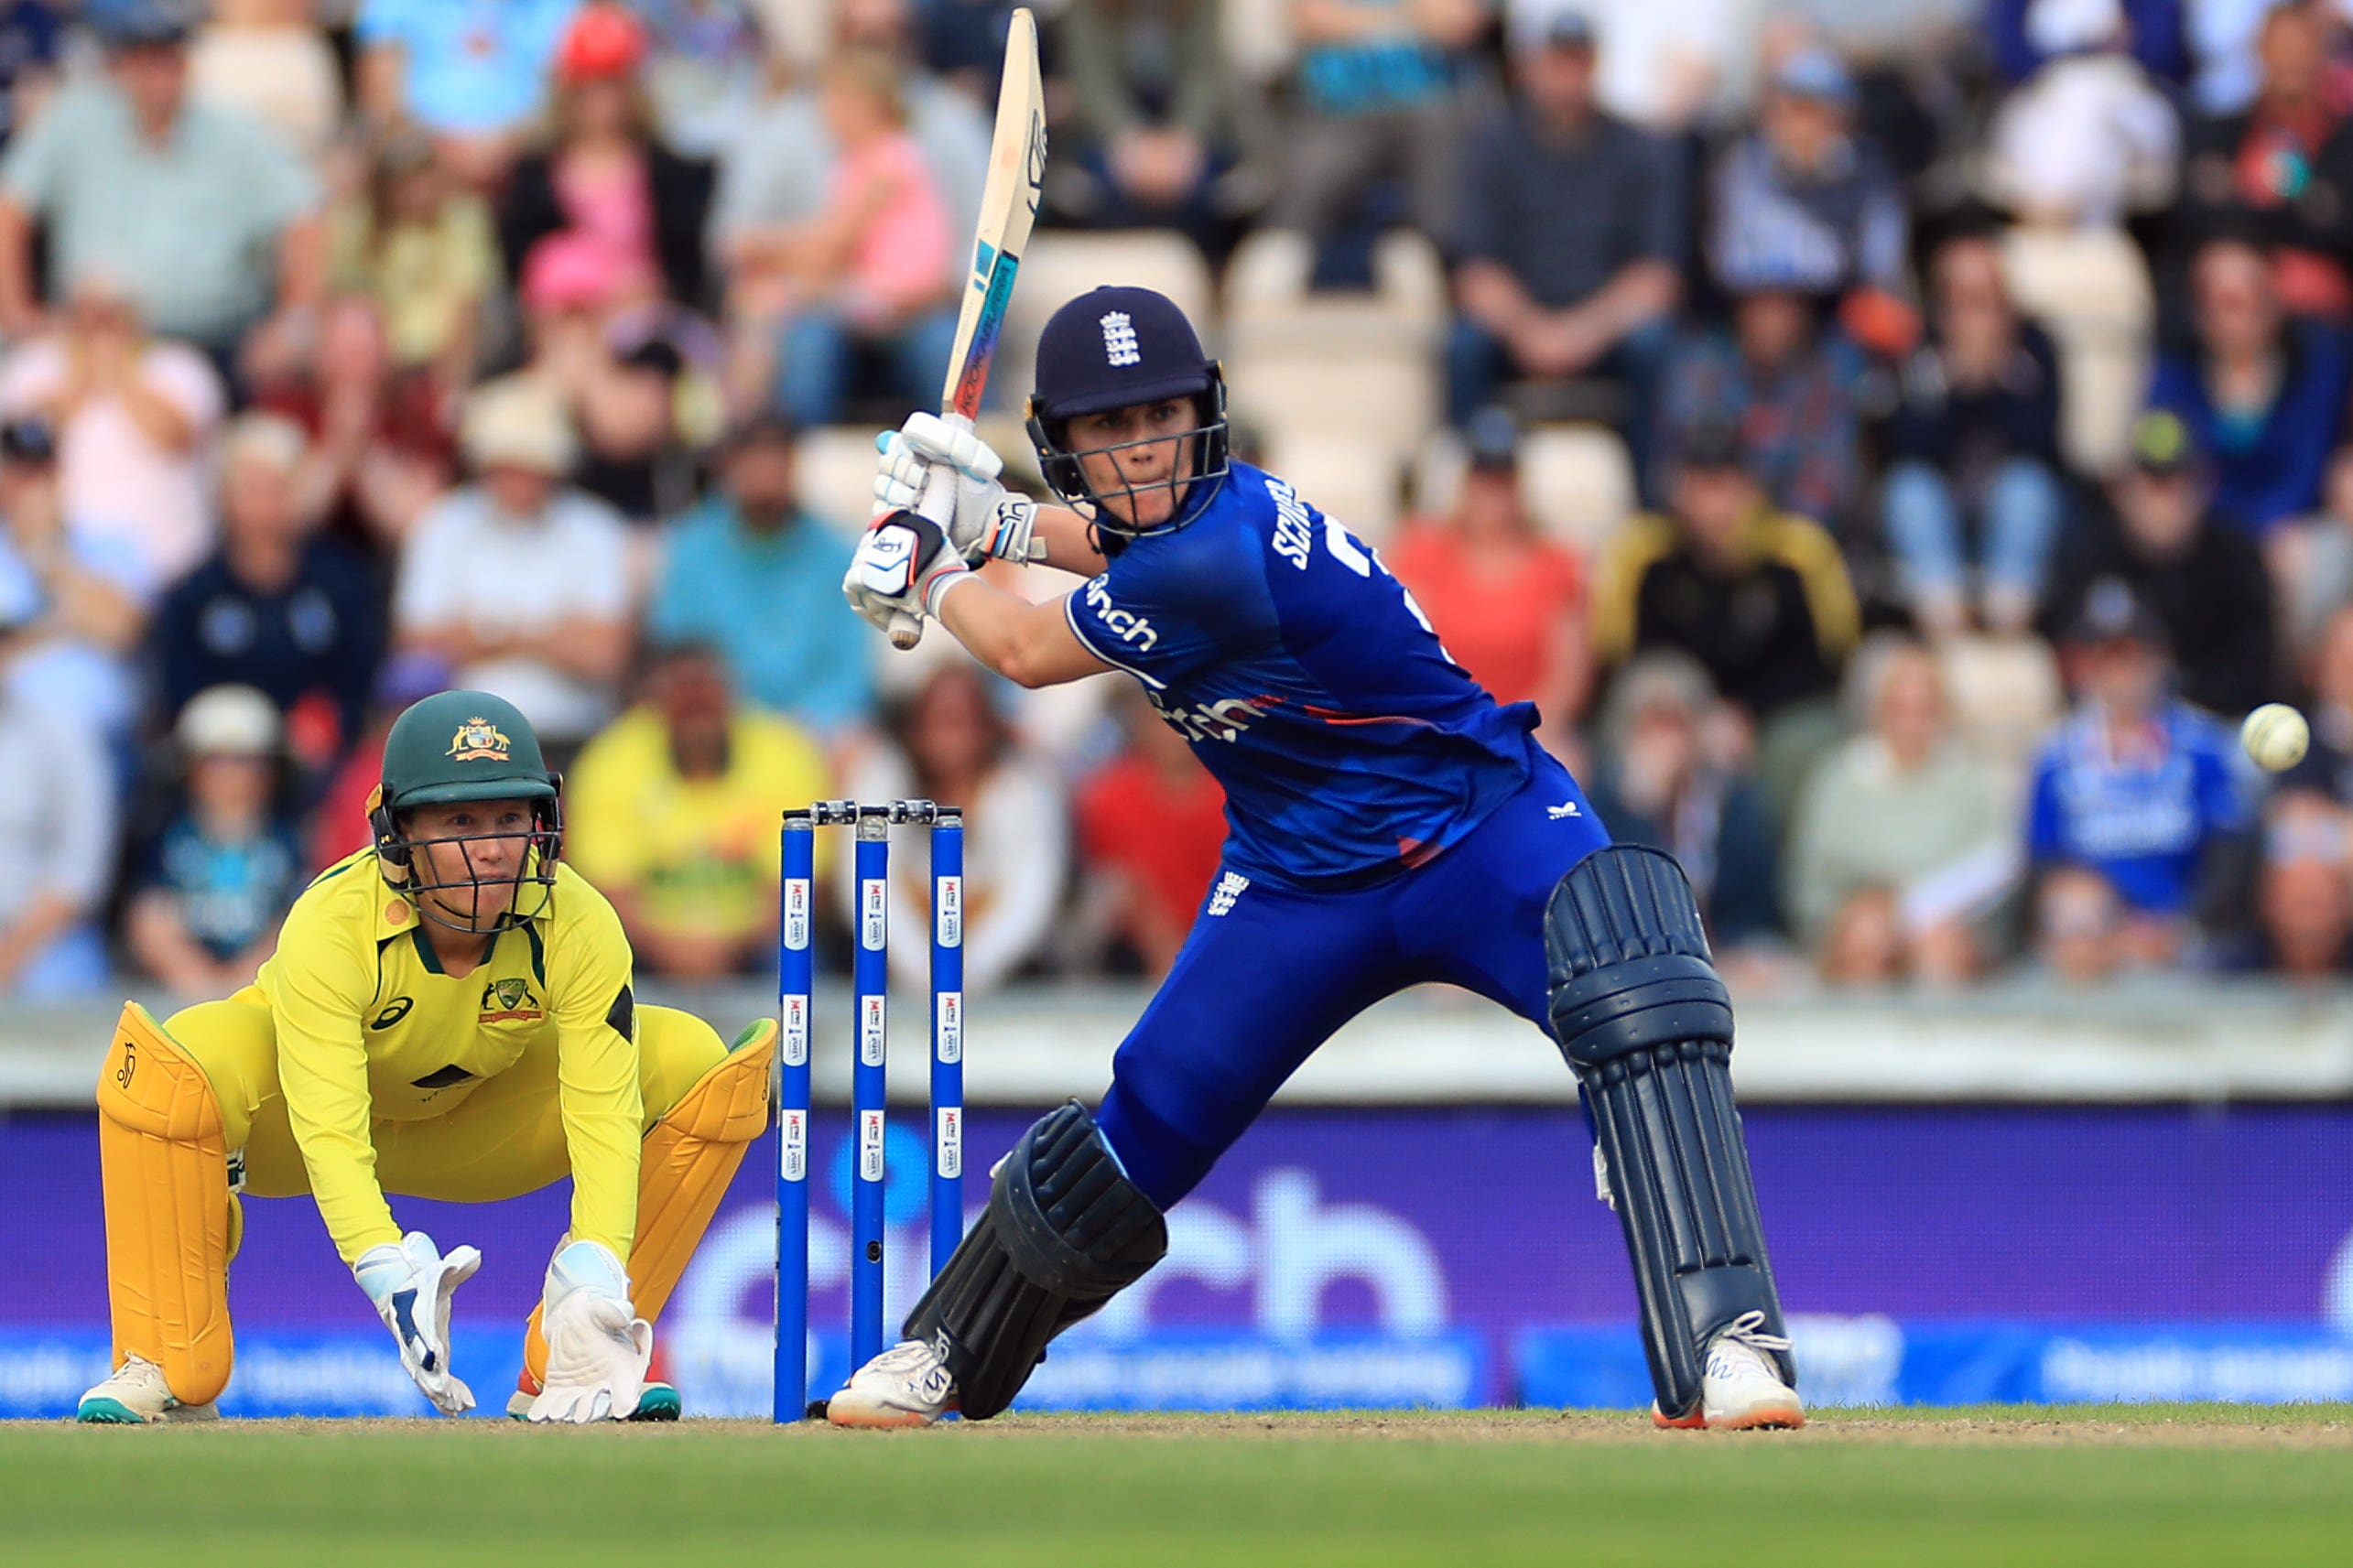 Nat Sciver-Brunt’s 111 cannot stop Australia from retaining the Ashes in Southampton